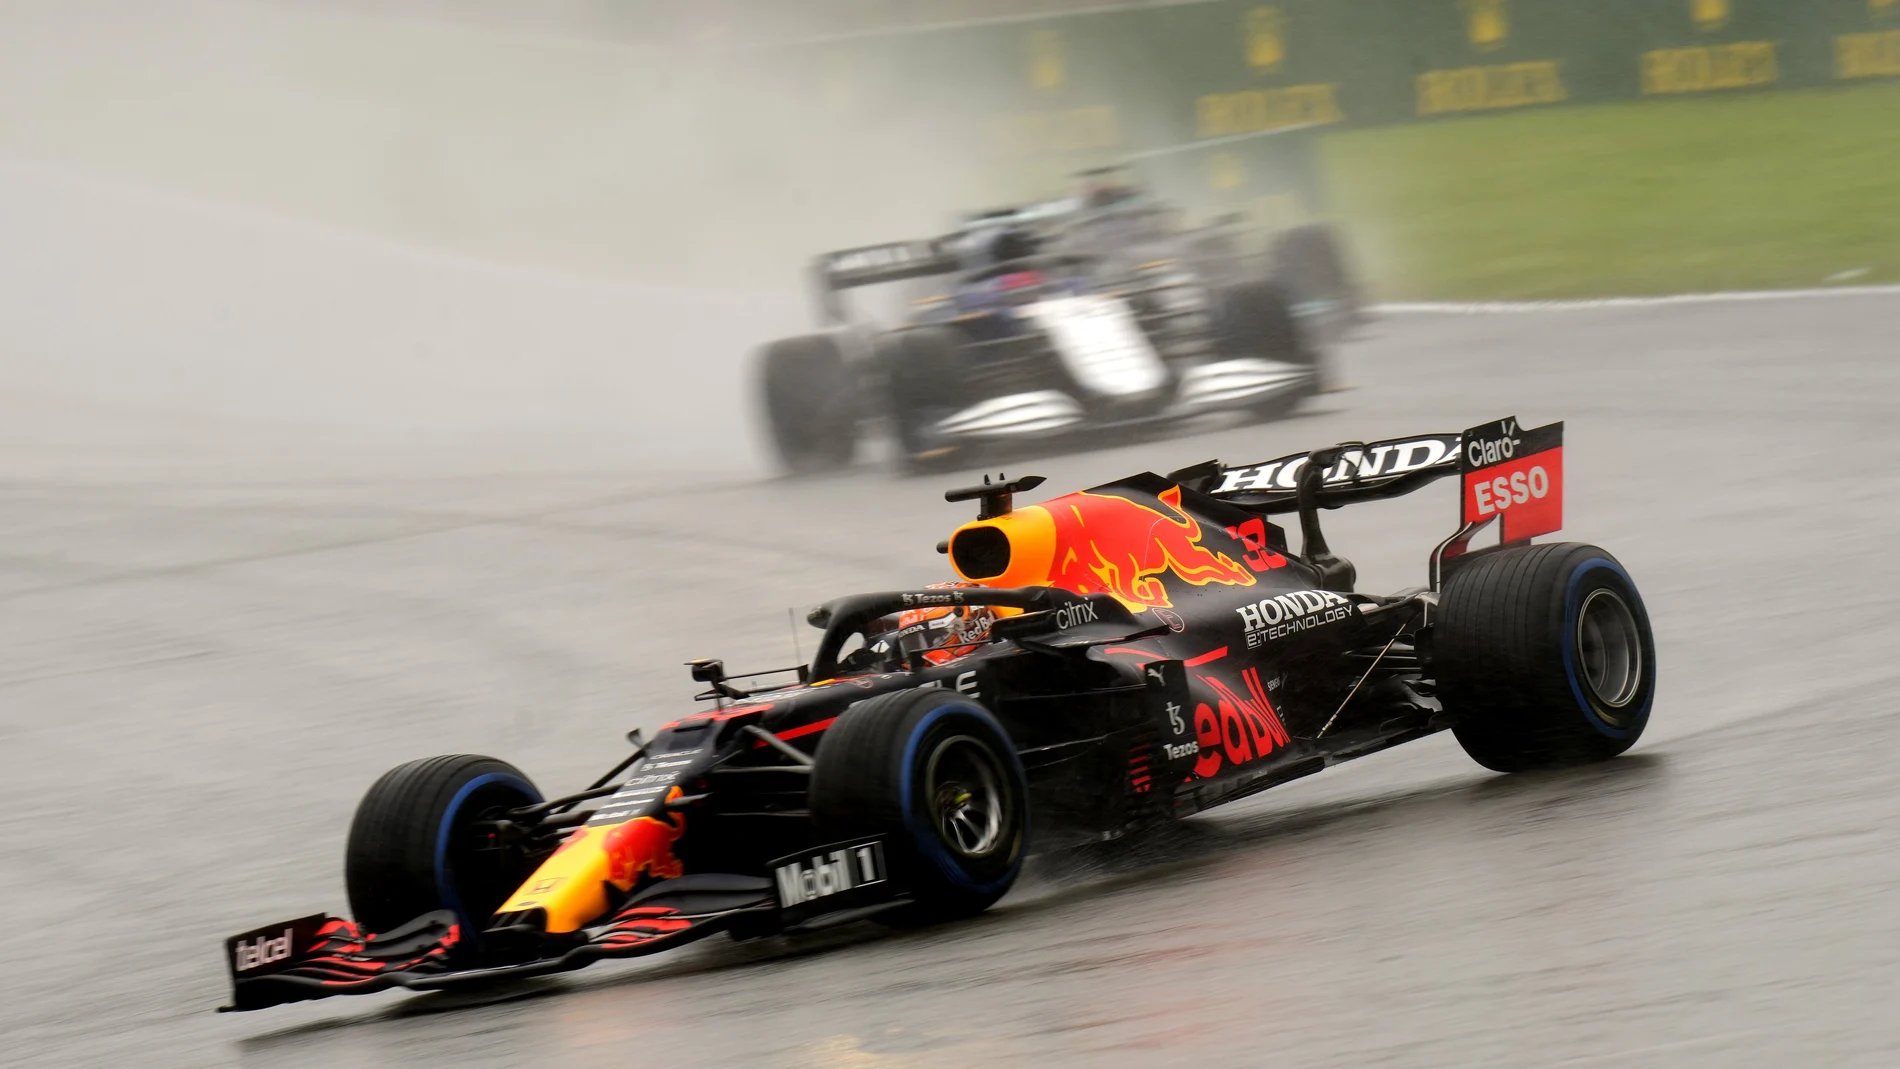 Red Bull driver Max Verstappen of the Netherlands steers his car behind the safety car during the Formula One Grand Prix at the Spa-Francorchamps racetrack in Spa, Belgium, Sunday, Aug. 29, 2021. (AP Photo/Francisco Seco)